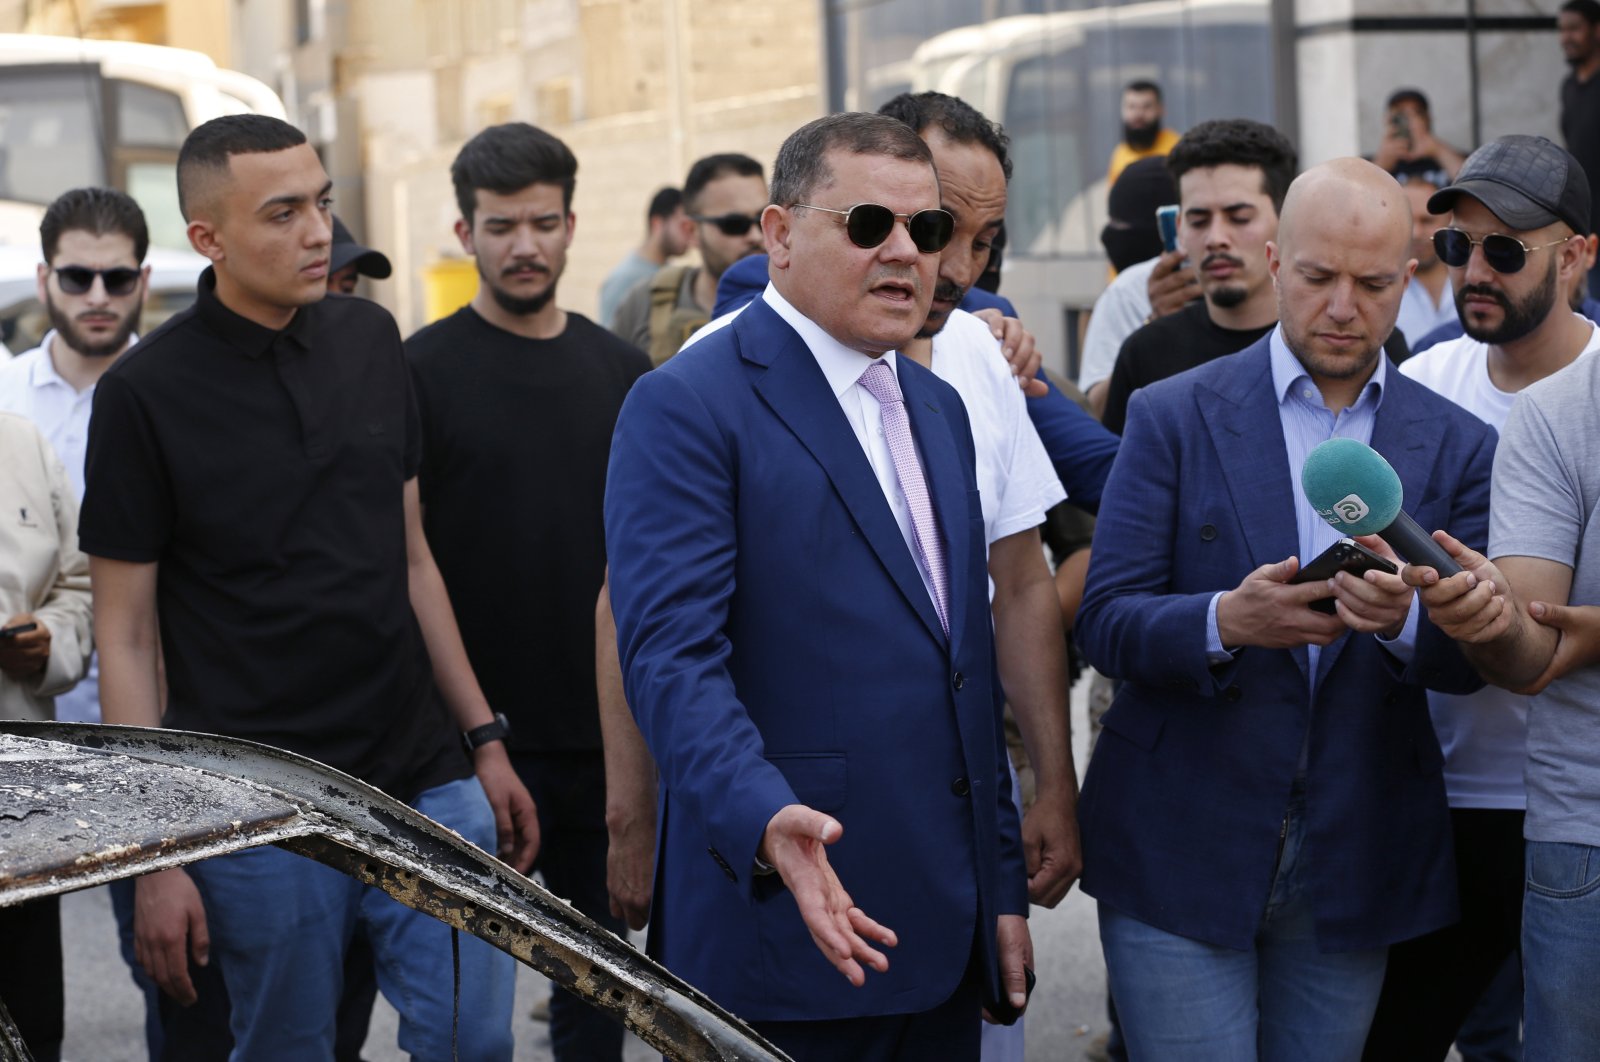 Abdul Hamid Dbeibah, one of Libya’s two rival prime ministers (C) speaks to residents as he visits a Tripoli neighborhood after competing militias fought there, in Tripoli, Libya, May 17, 2022. (AP Photo)